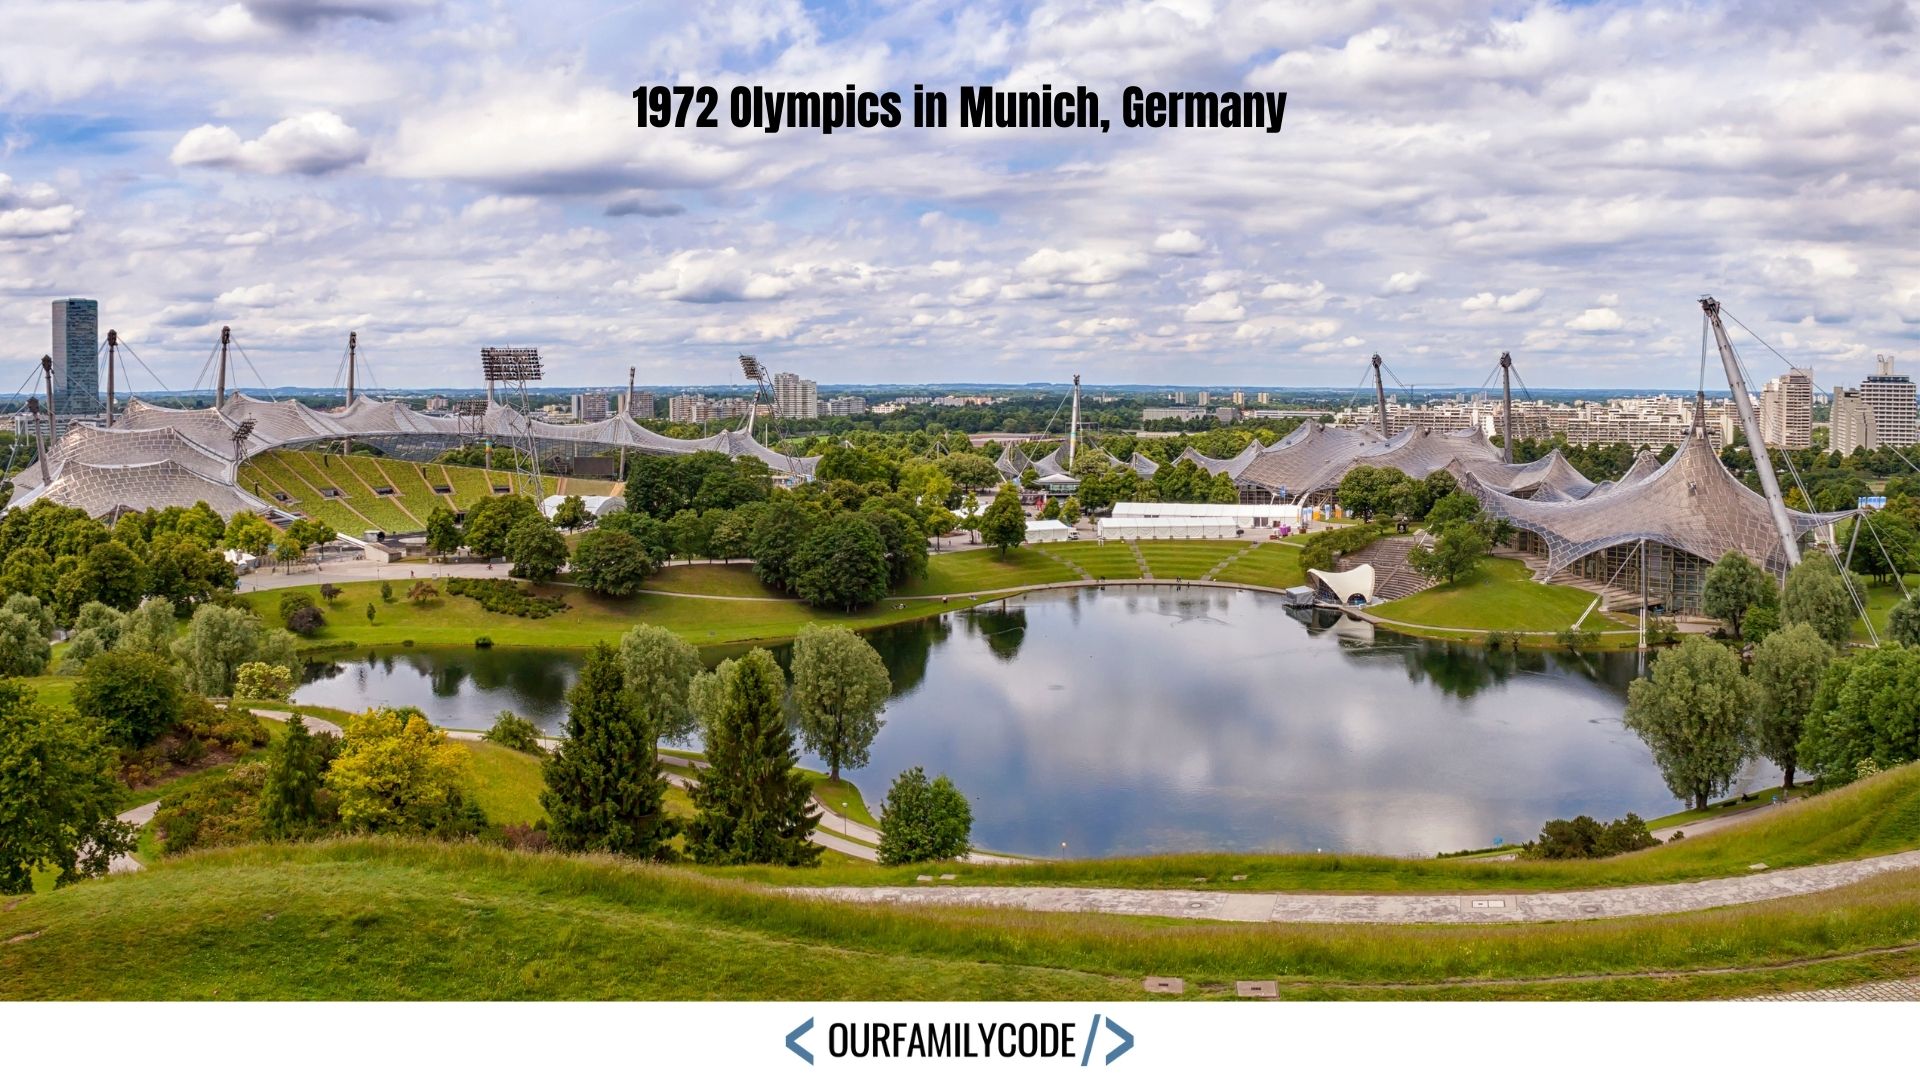 The Olympic Park "Olympiapark" was designed by architect Gunther Behnisch with canopies of acrylic glass held by metal ropes for the 1972 Summer Olympic Games in Munich, Germany.